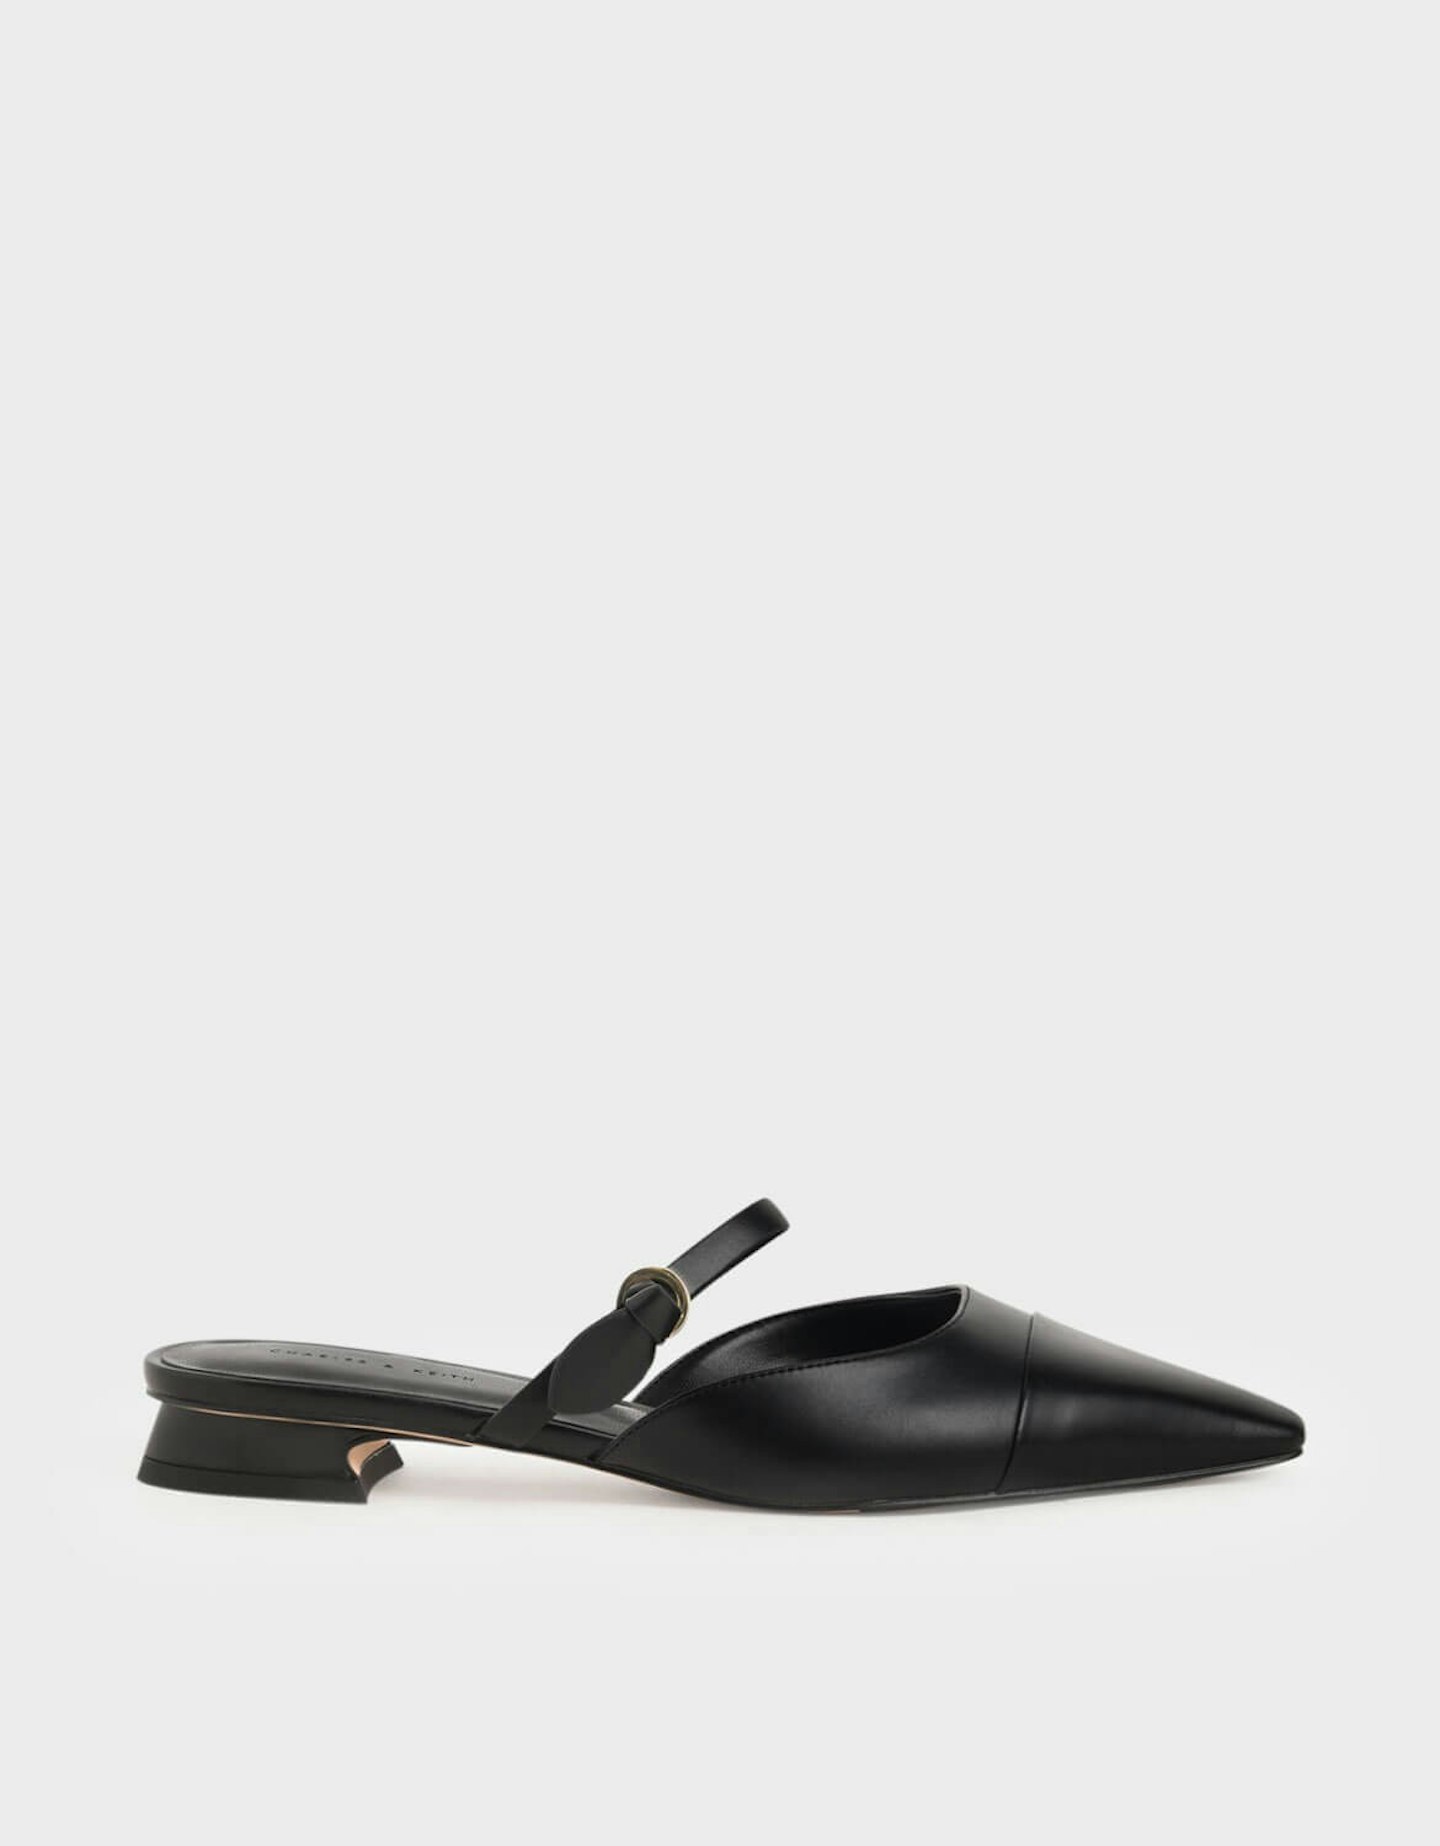 Charles & Keith, Mary Jane Strap Flat Mules, £45